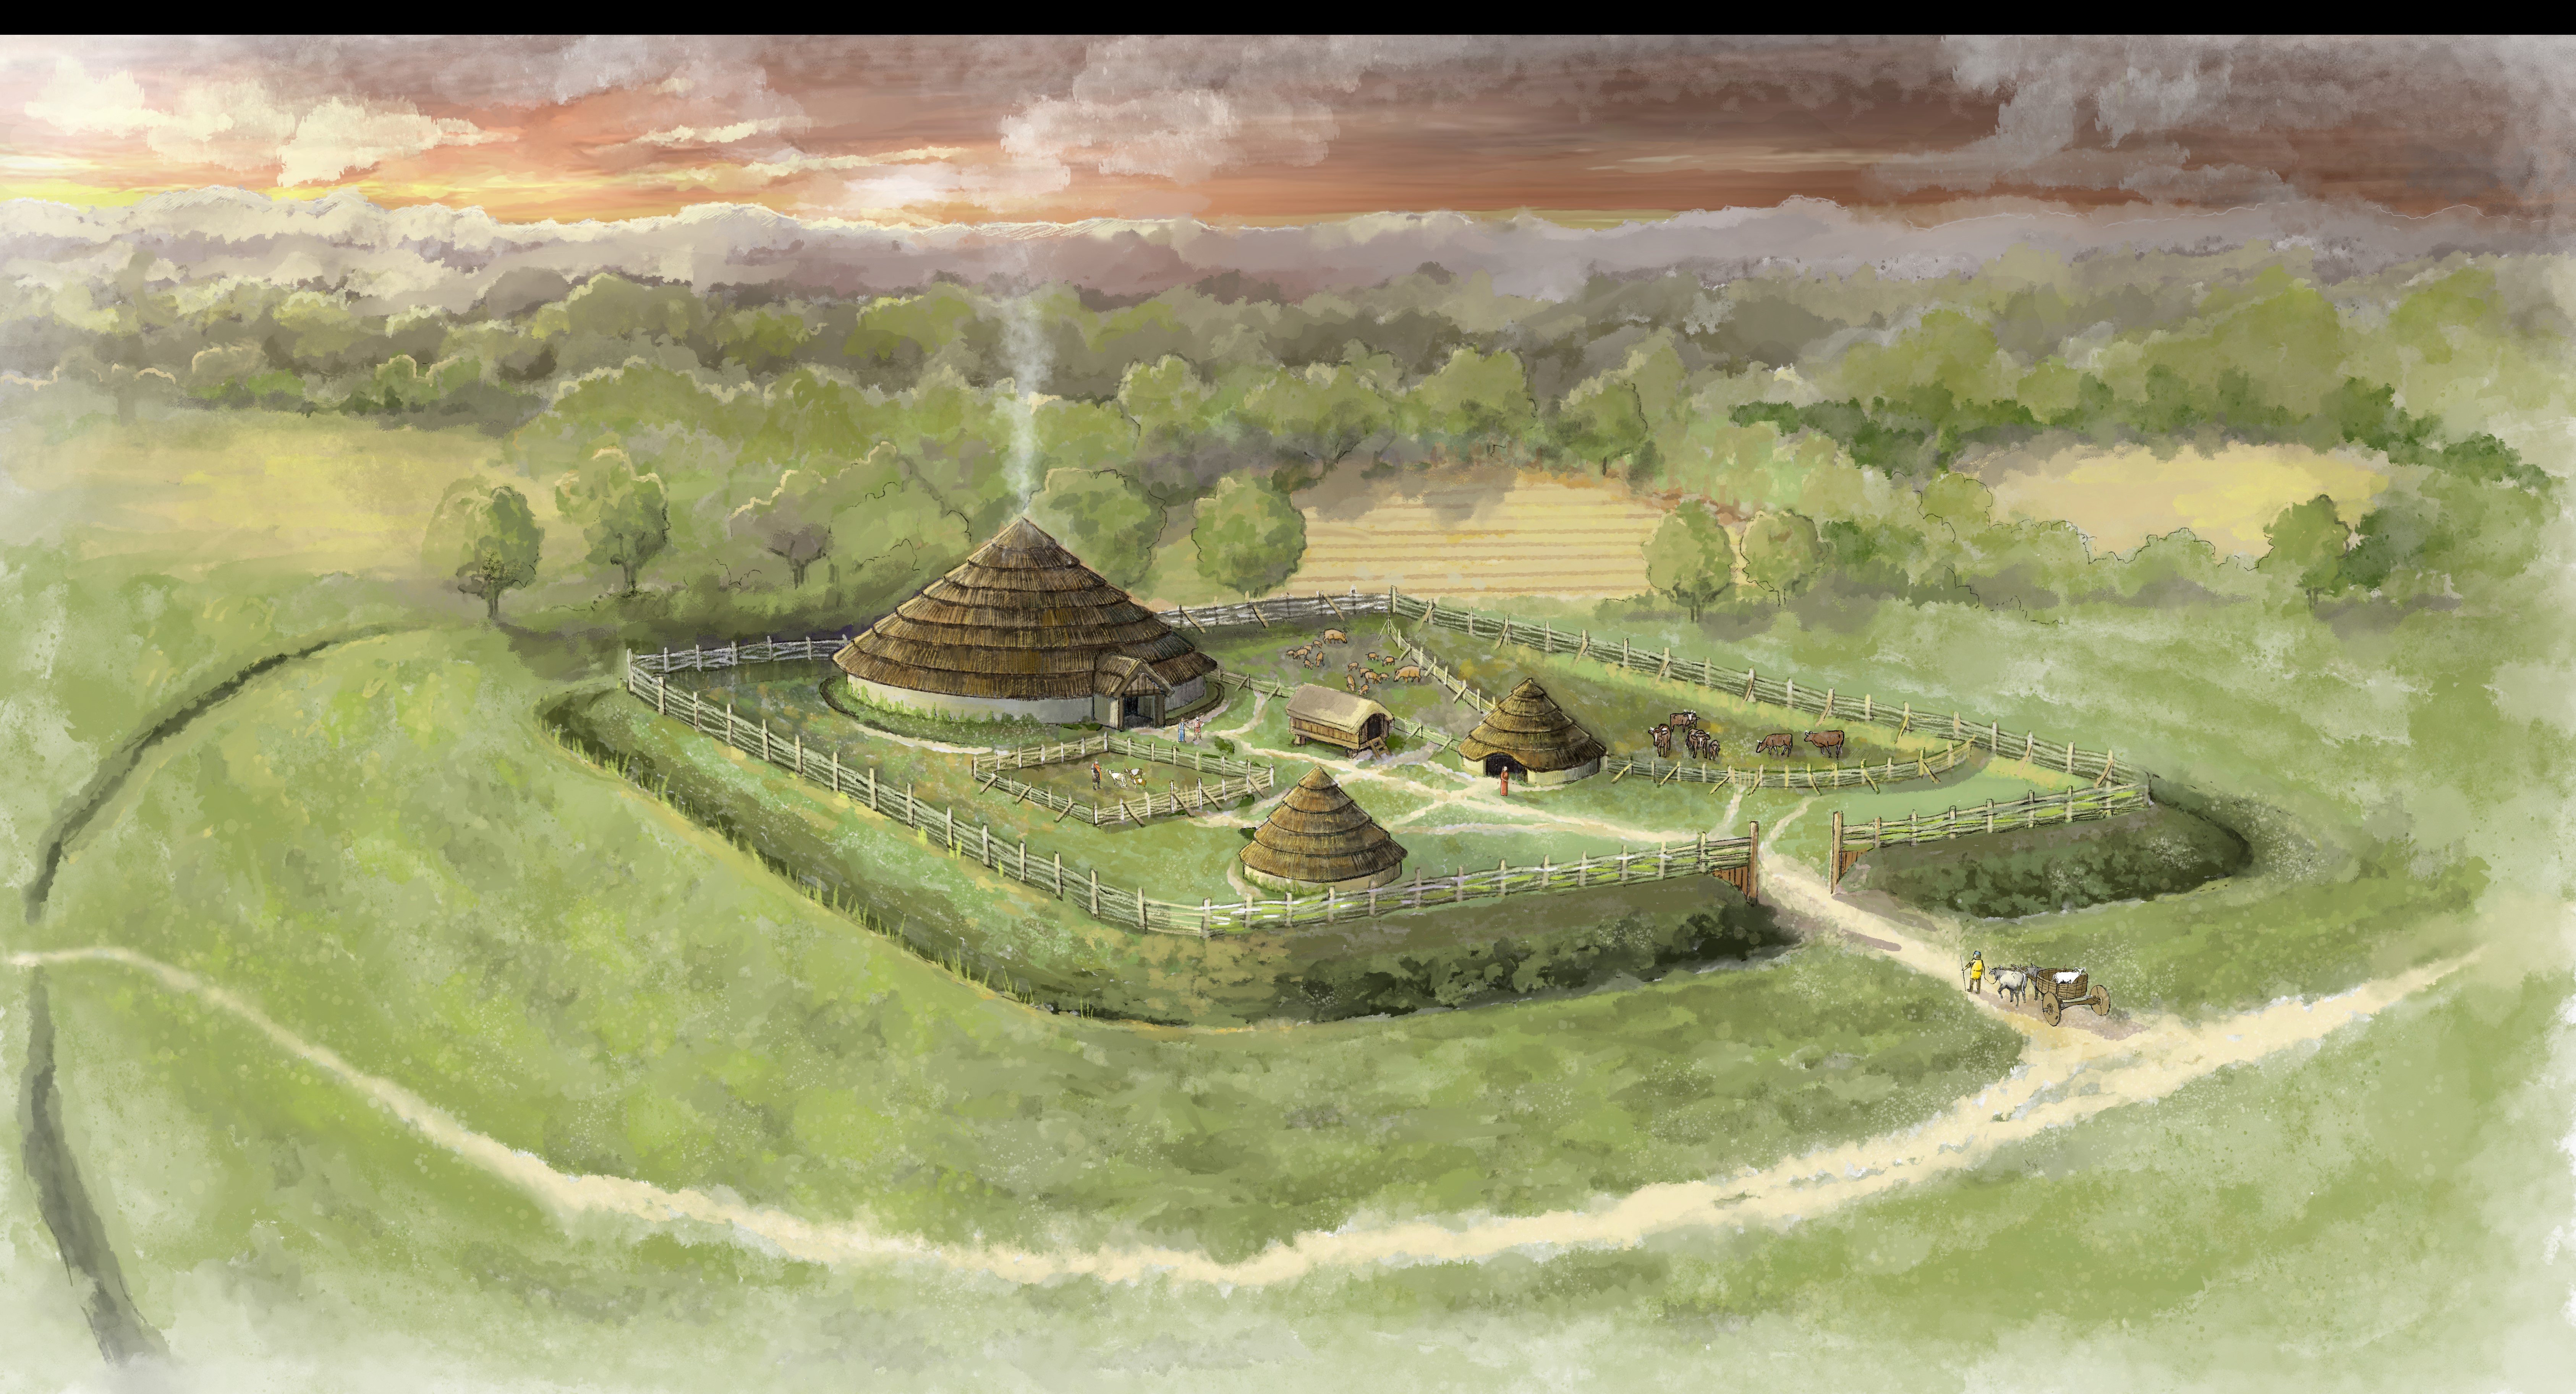 Picture showing a large Iron Age roundhouse with smaller dwellings and fenced areas inside an enclosure